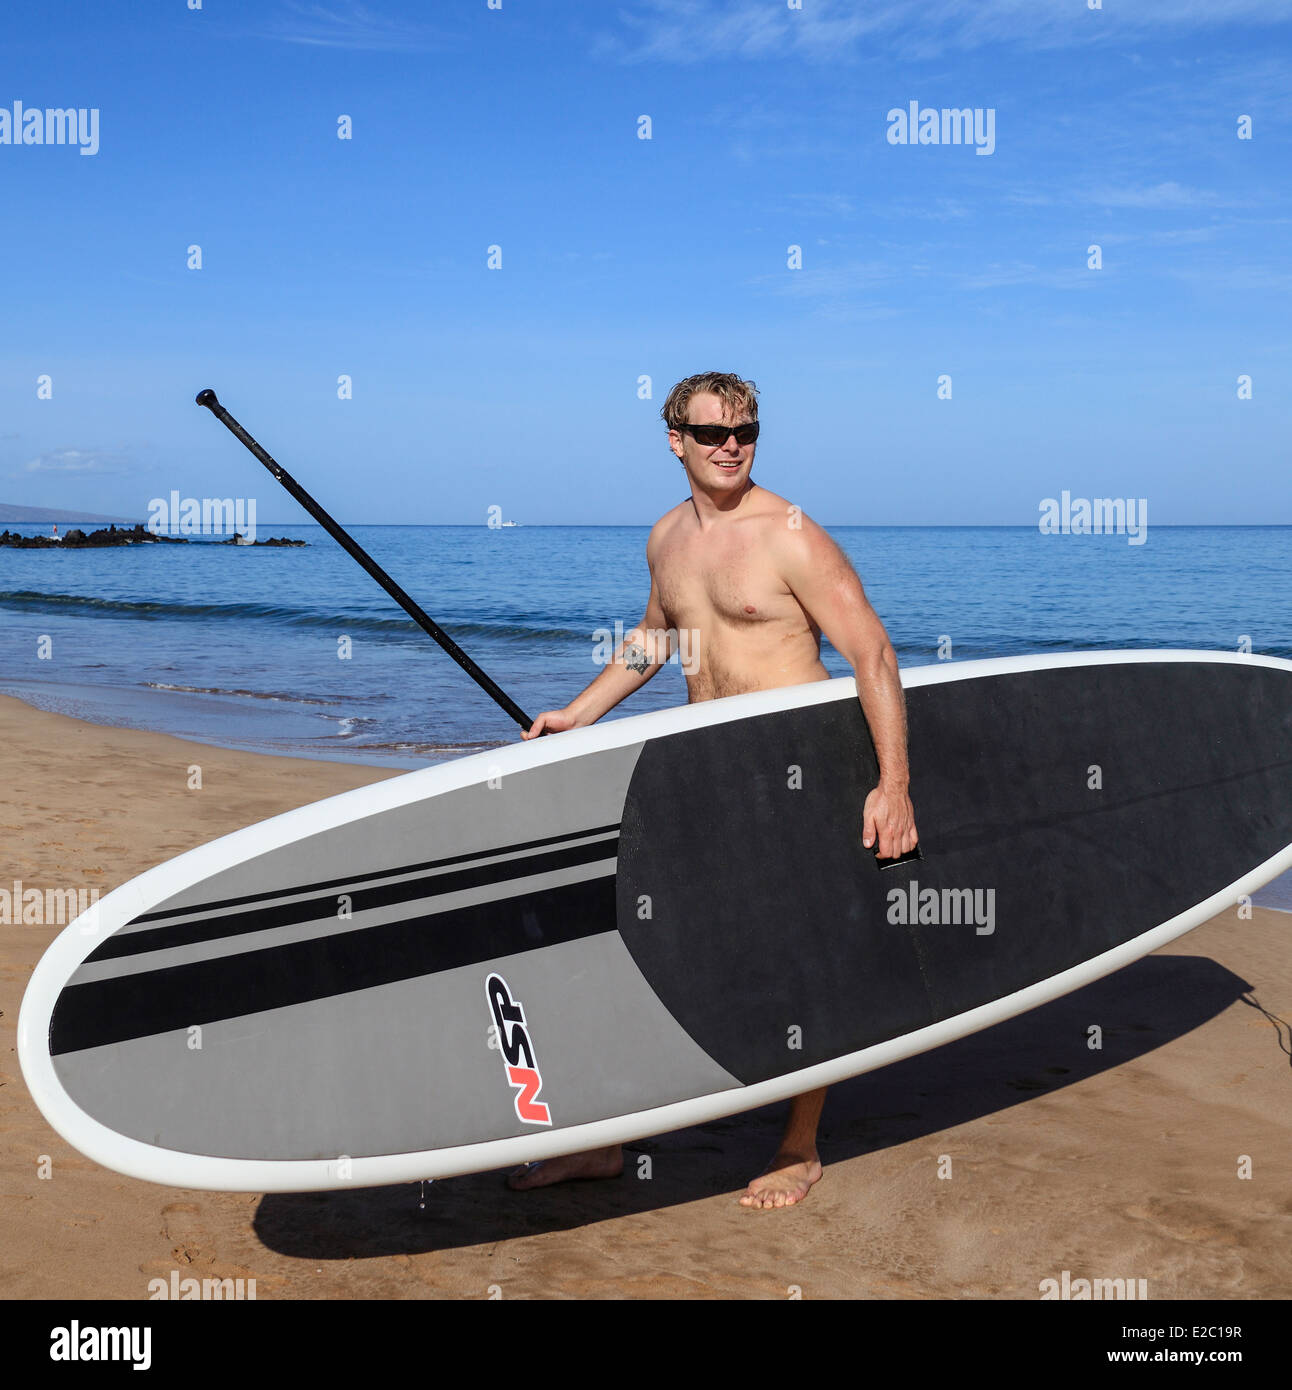 Man with stand up paddle board at Wailea Beach on Maui Stock Photo